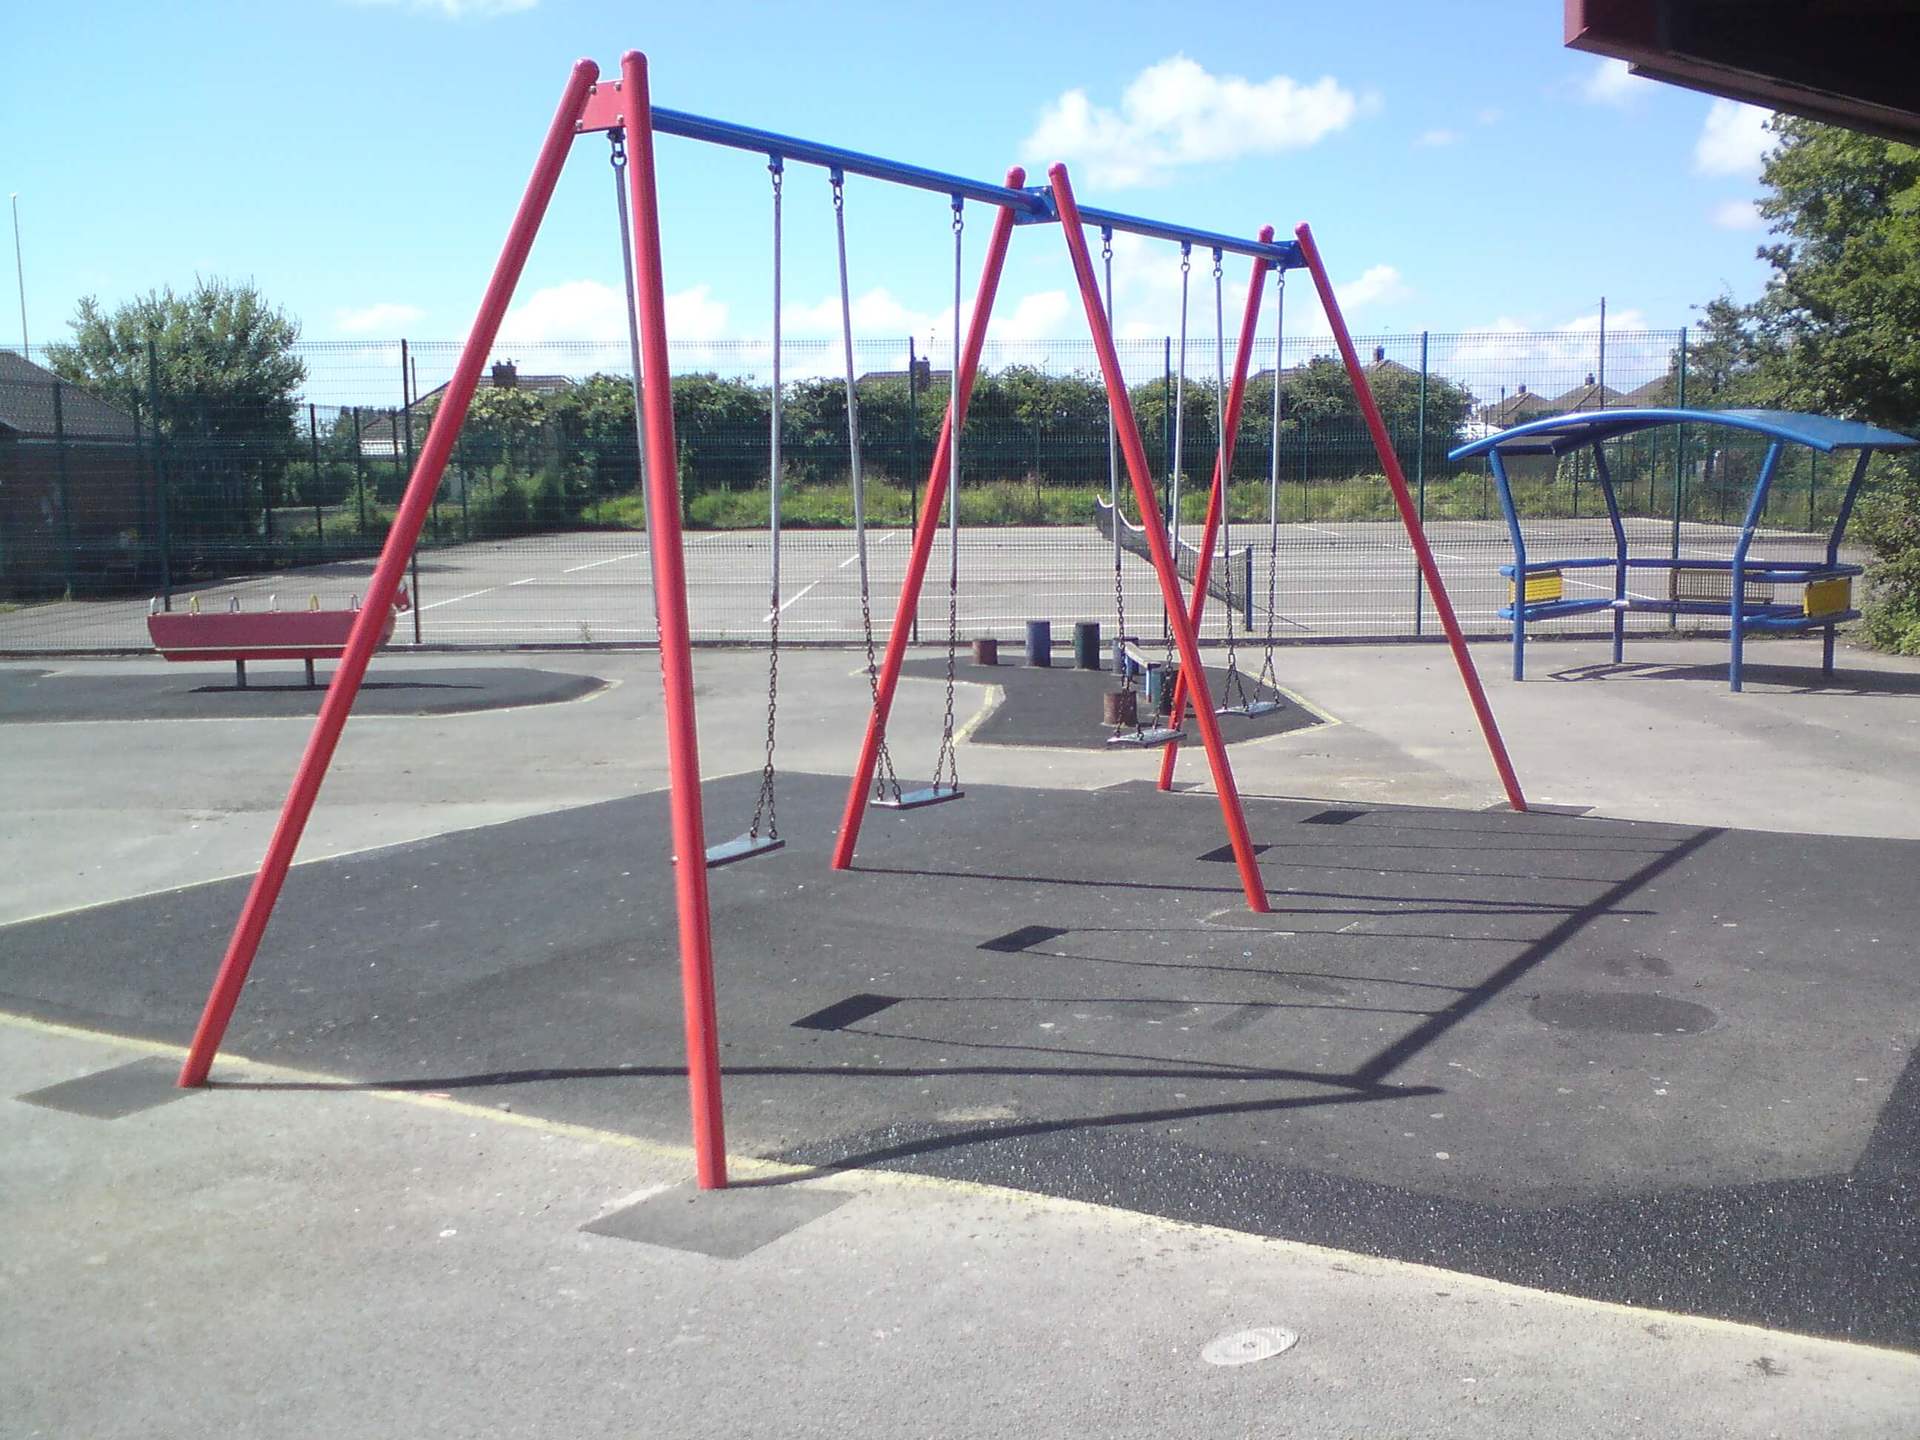 Side Profile of Playground Swing